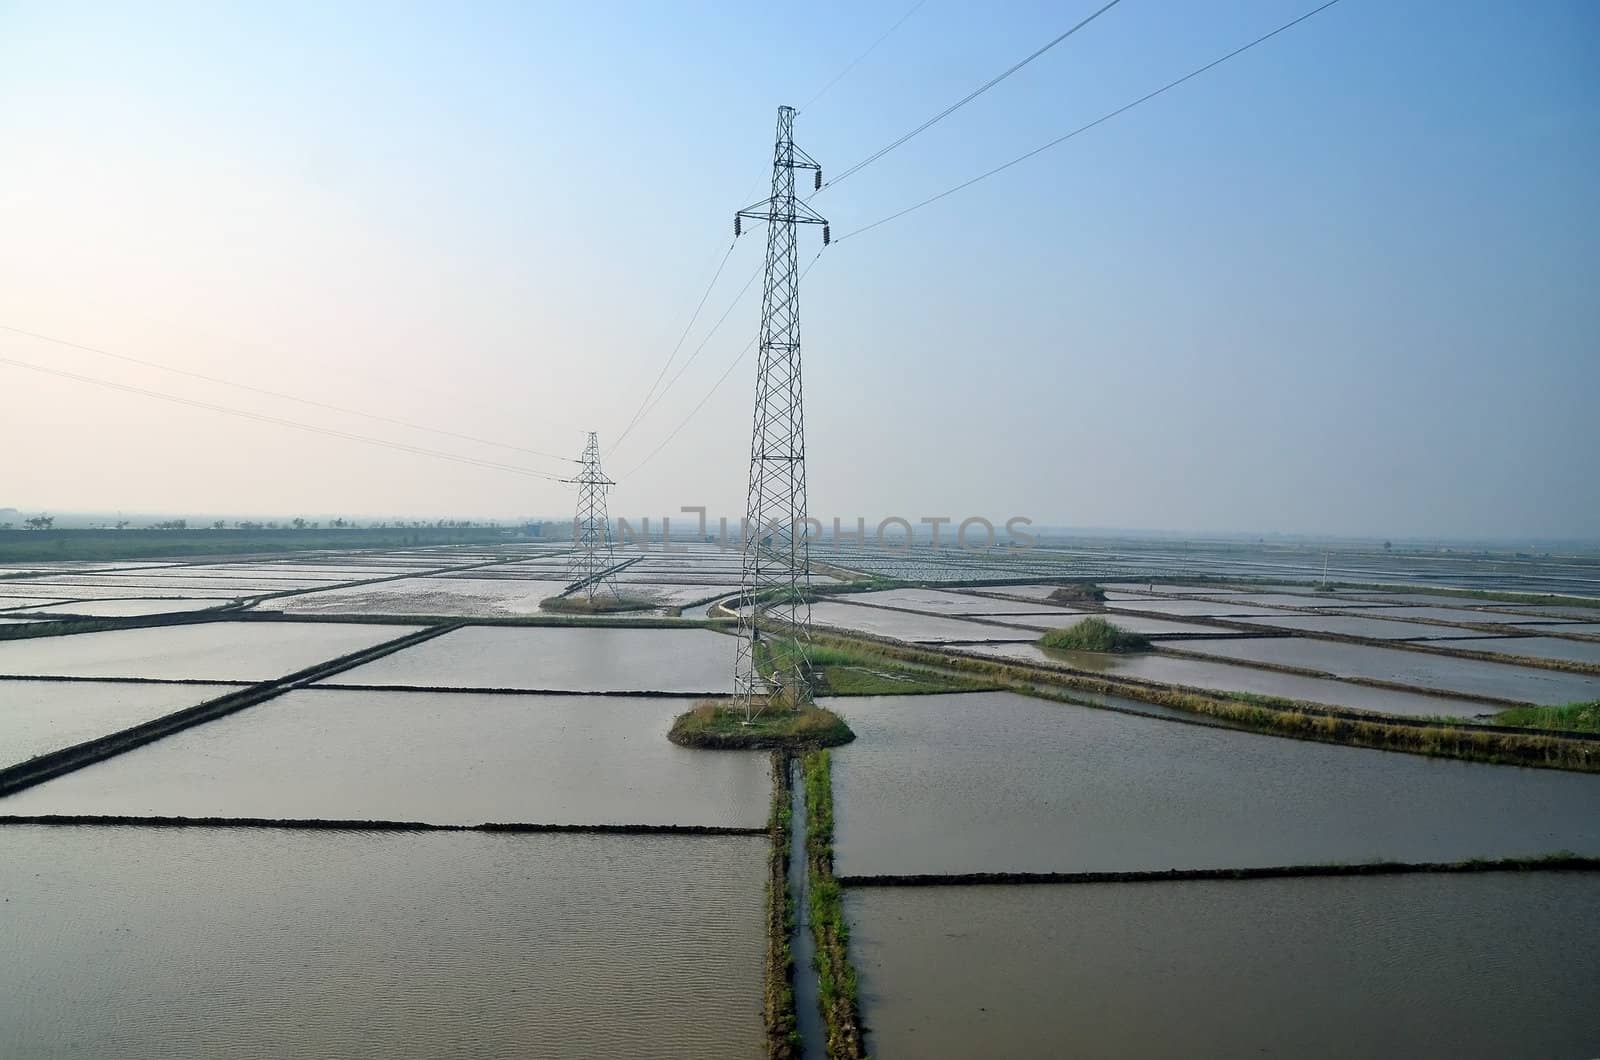 View of the rice fields in Hebei province in north east China